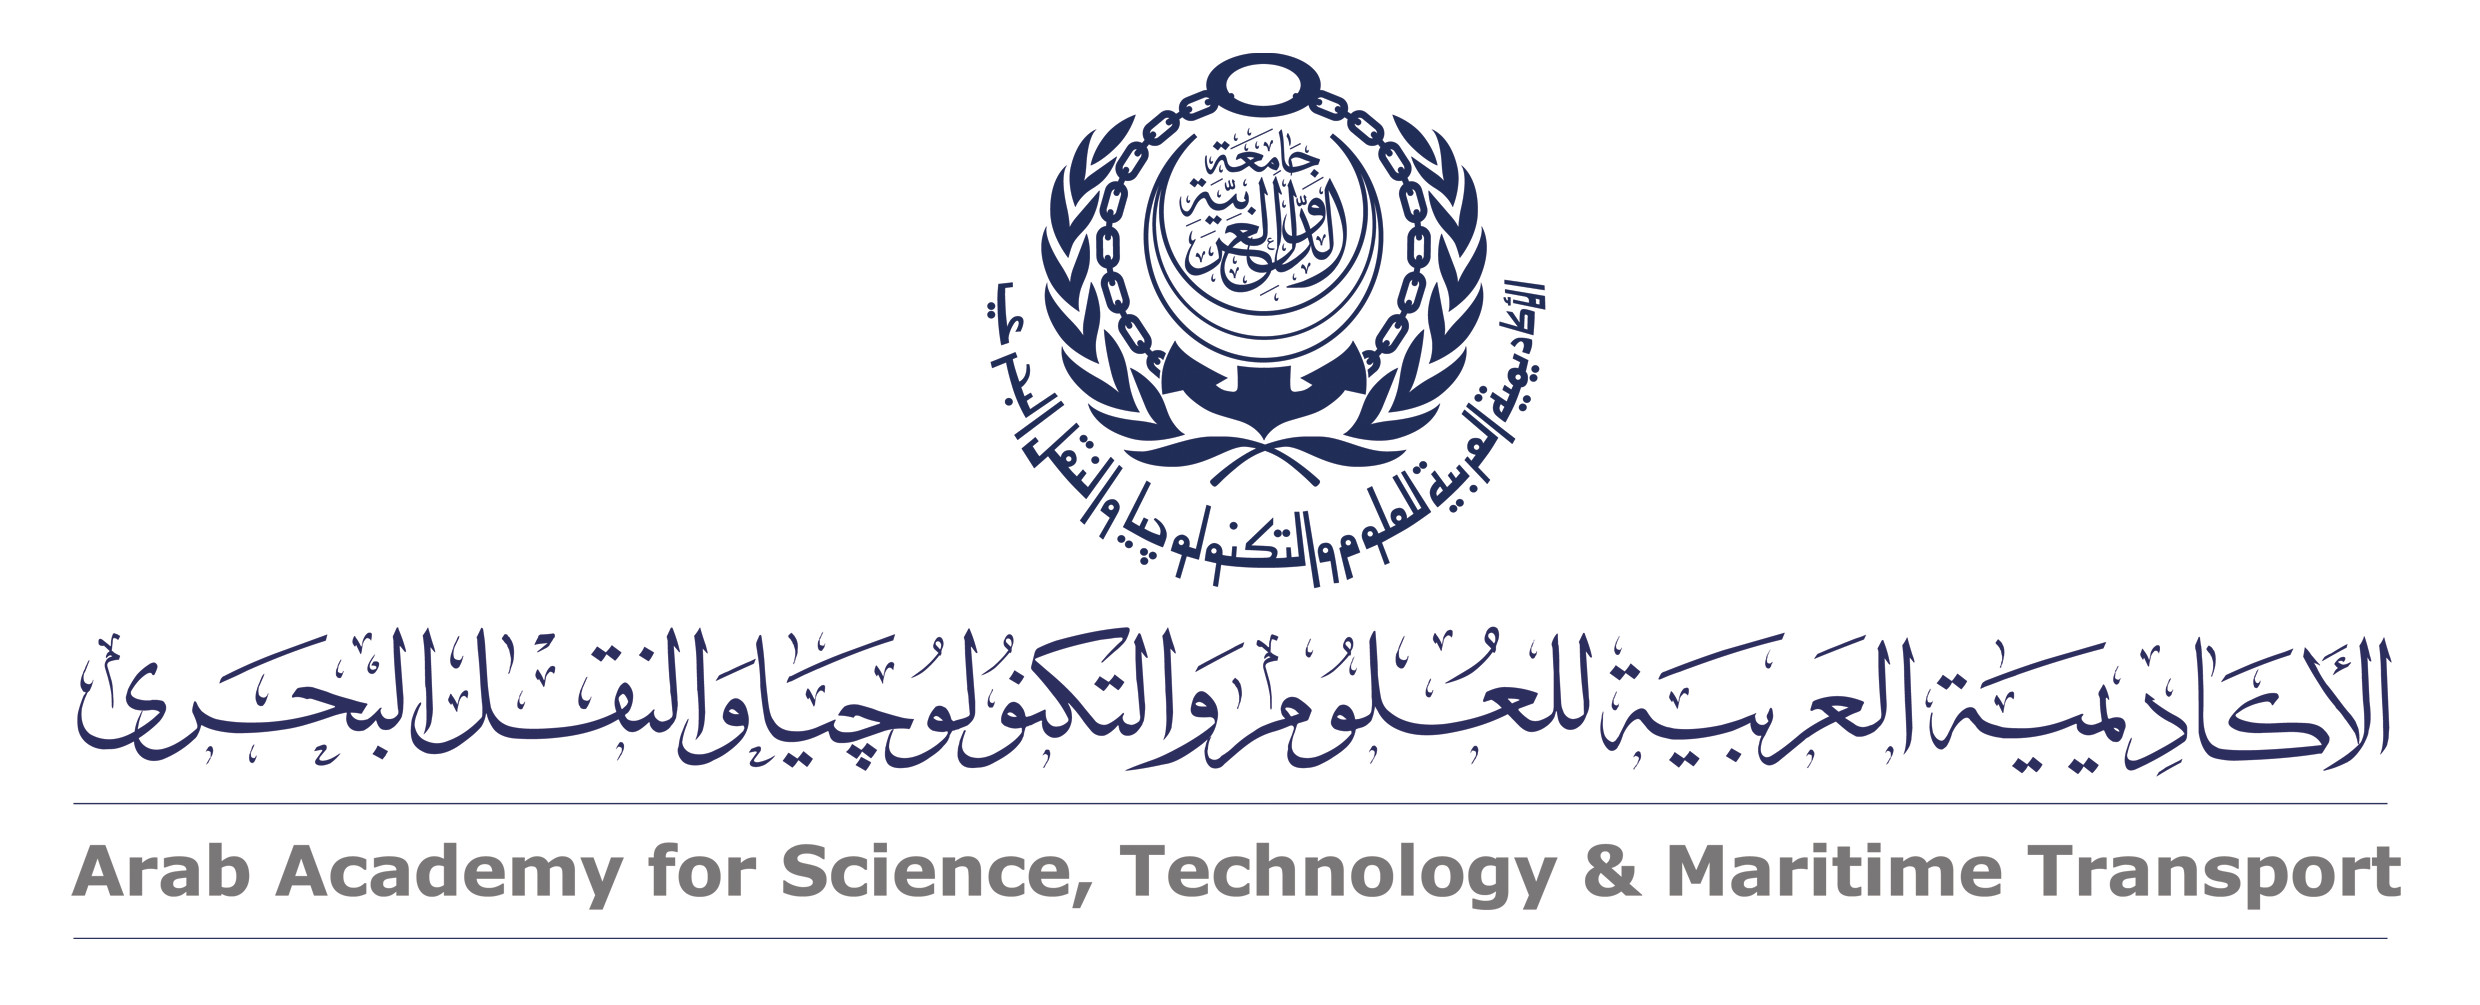 Arab Academy For Science, Technology & Maritime Transport